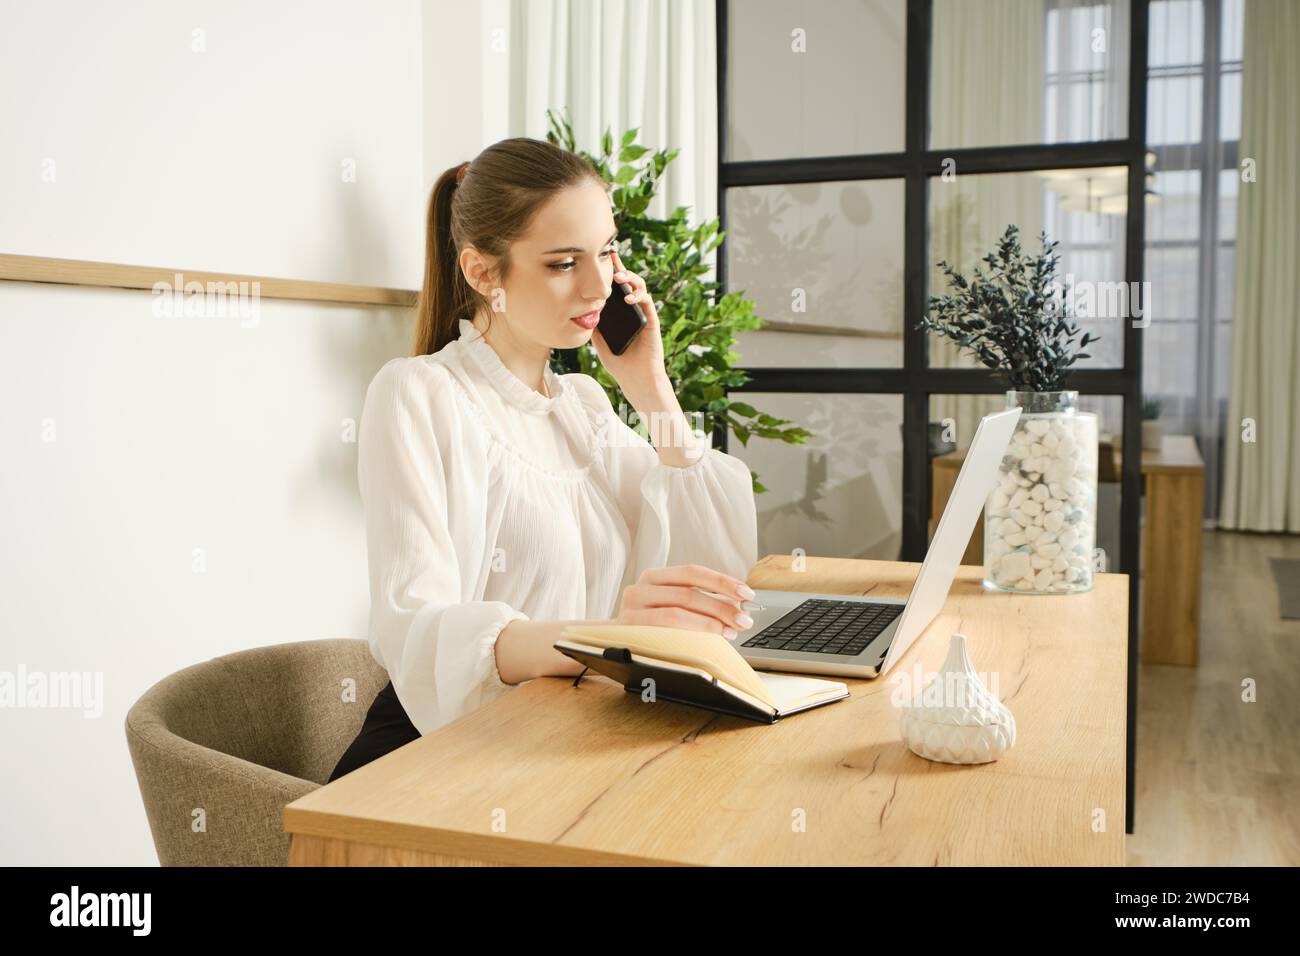 A young woman advises a client by phone, gives information and provides support Stock Photo